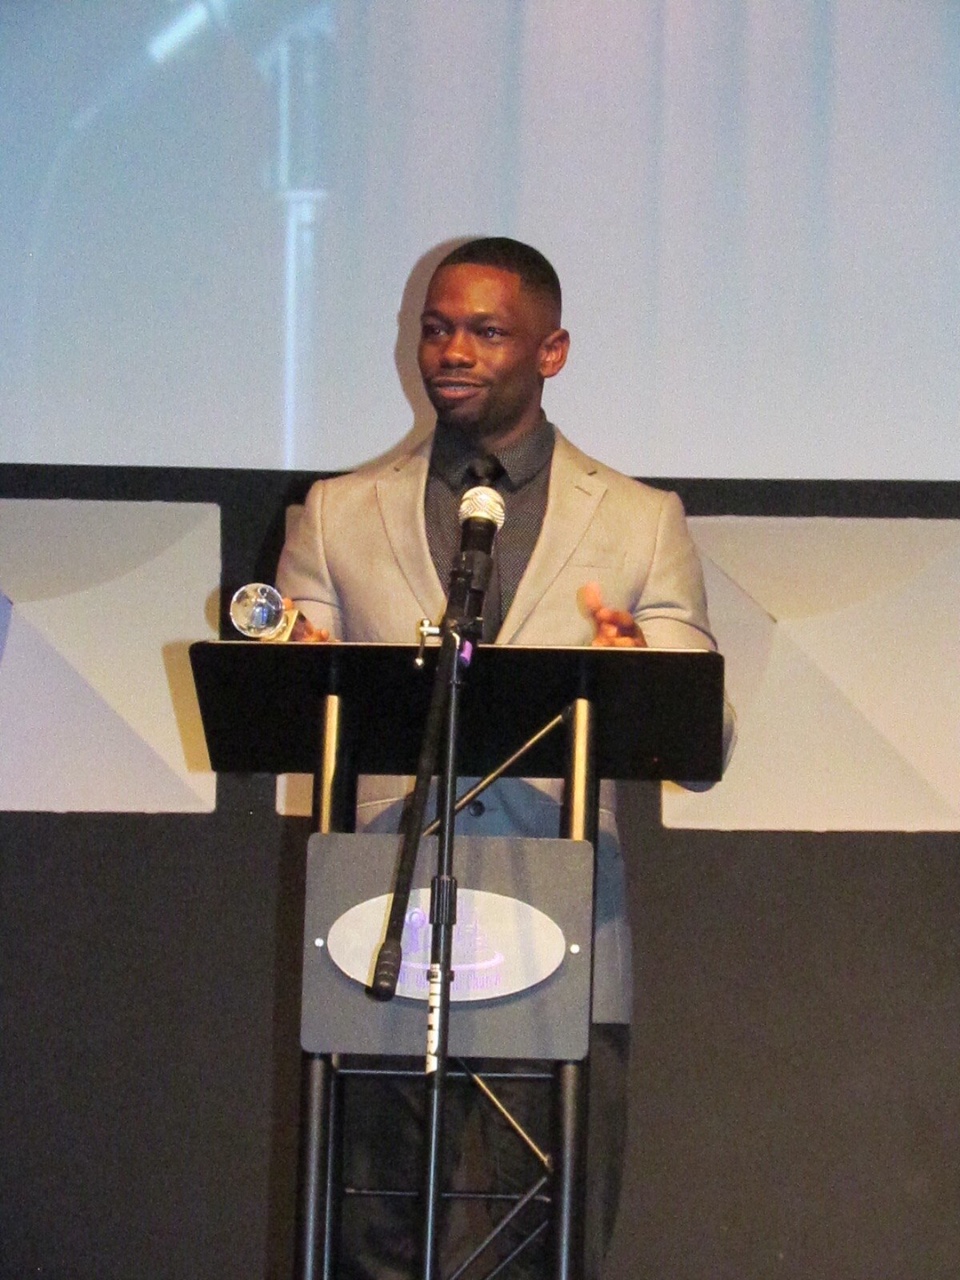 Patrick Vann receiving honors for Best Actor at The Aletheia Fellowship of the Arts Truth Awards